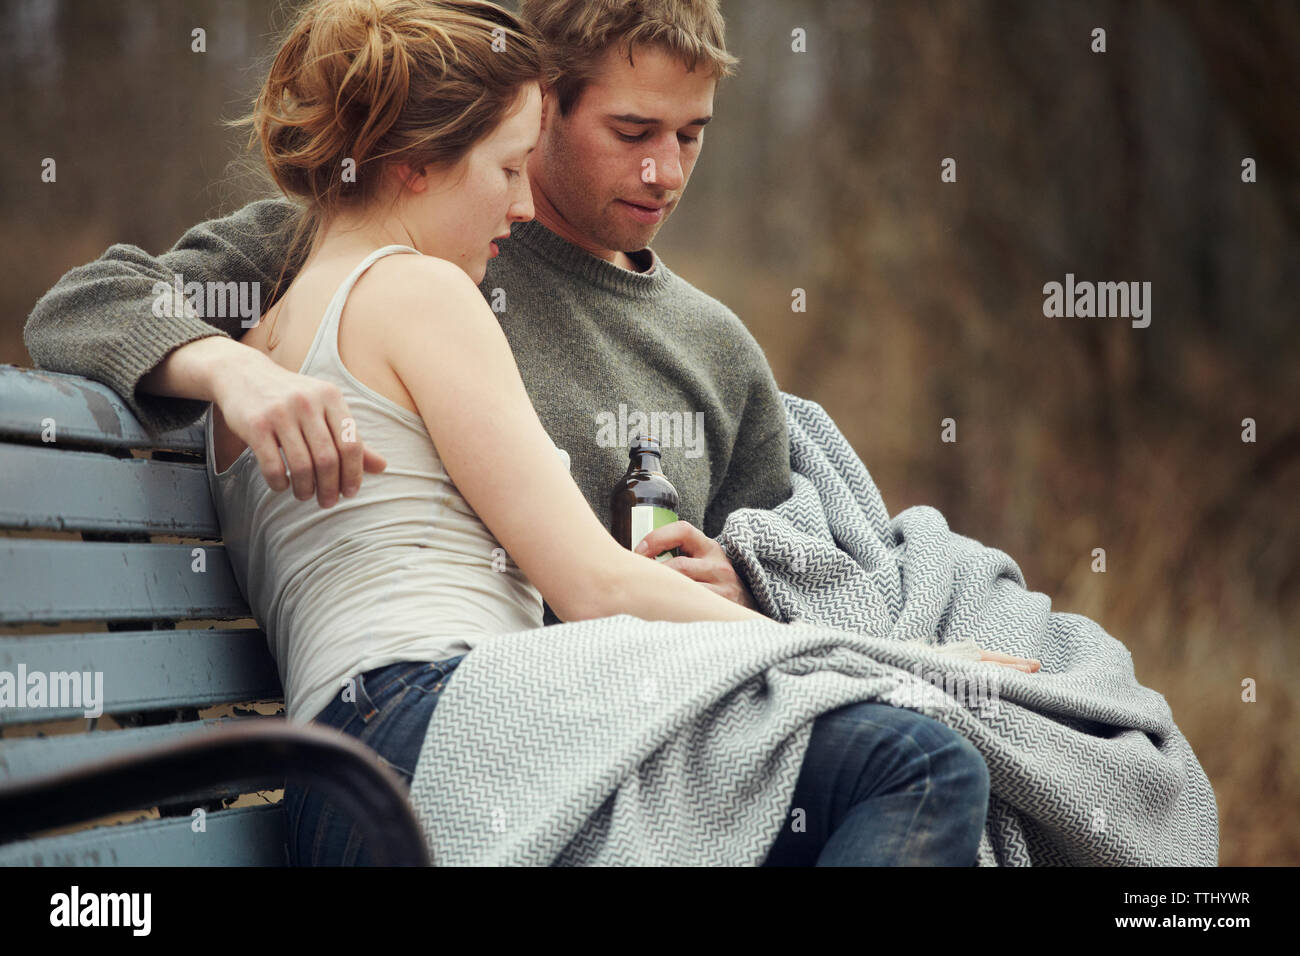 Couple looking down while sitting on bench Stock Photo